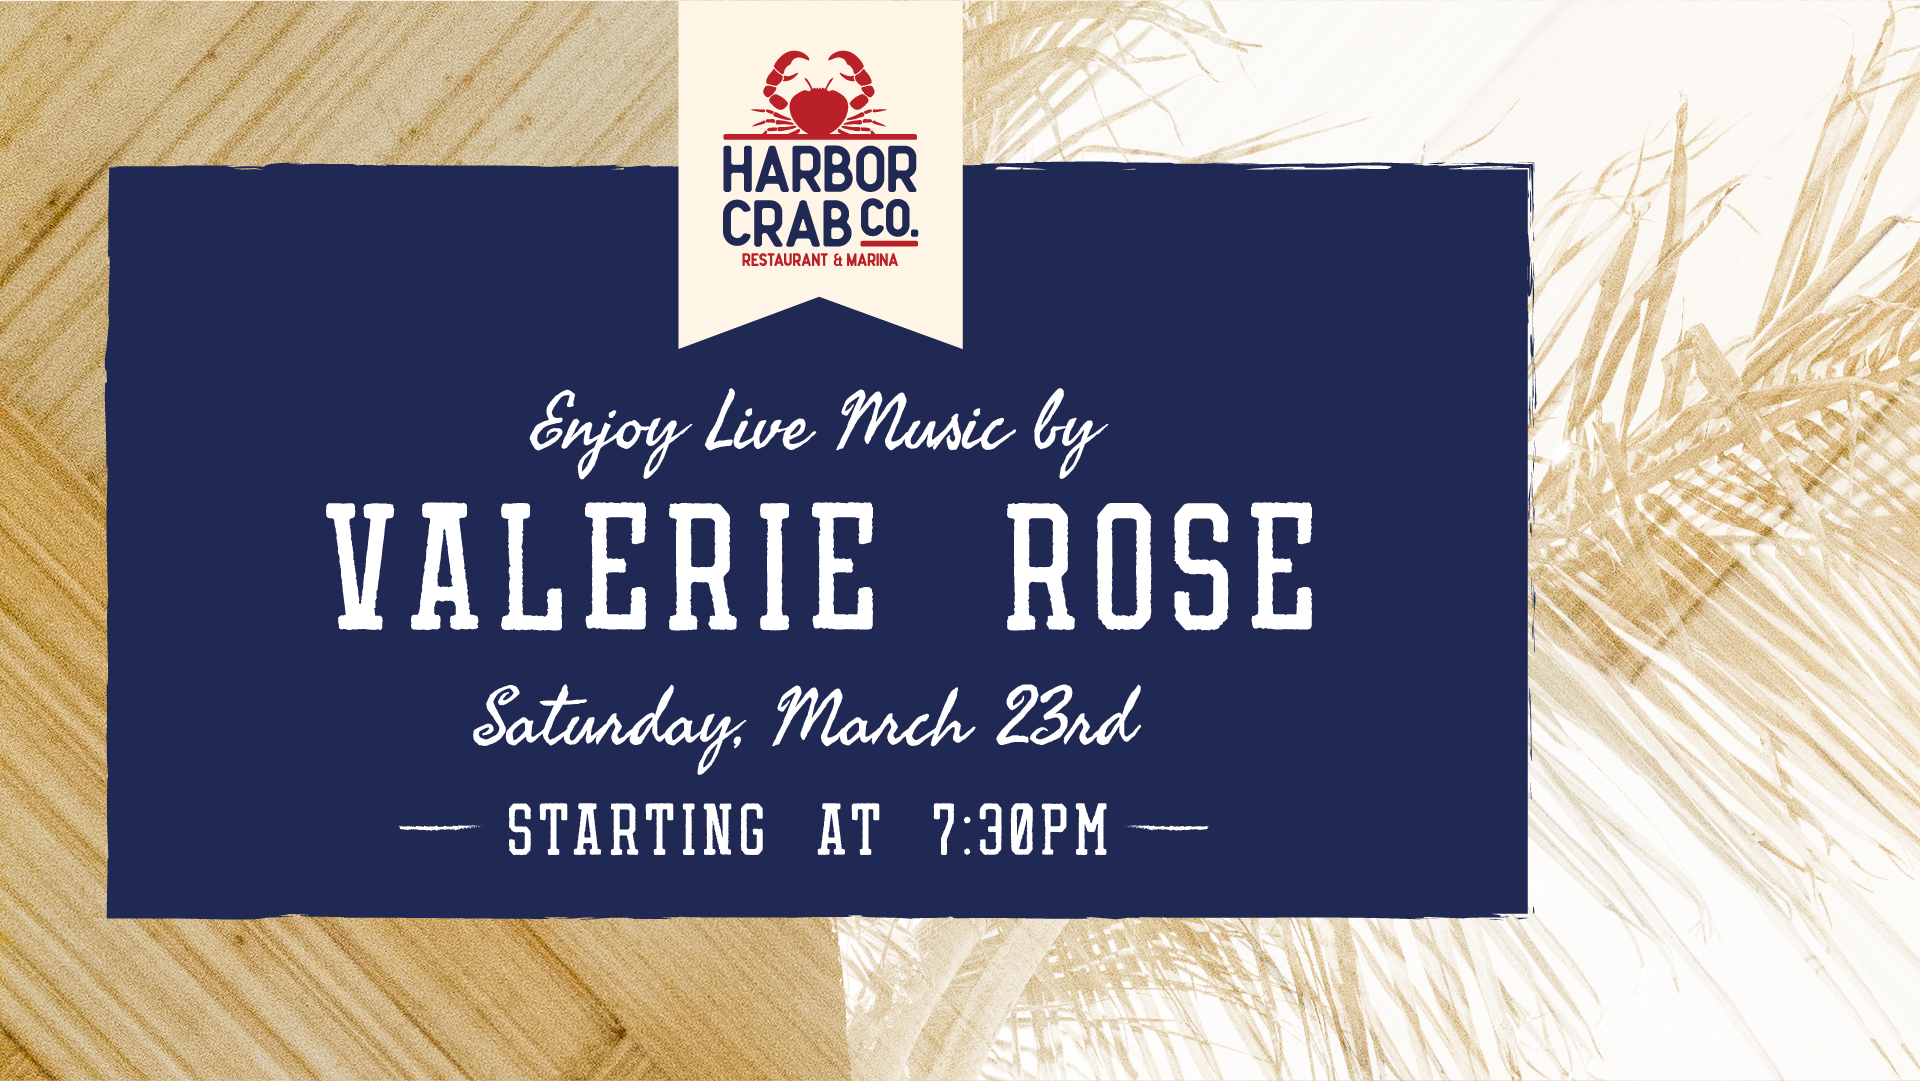 Flyer announcing Valerie Rose's live performance at Harbor Crab on Saturday, March 23rd, beginning at 7:30 PM